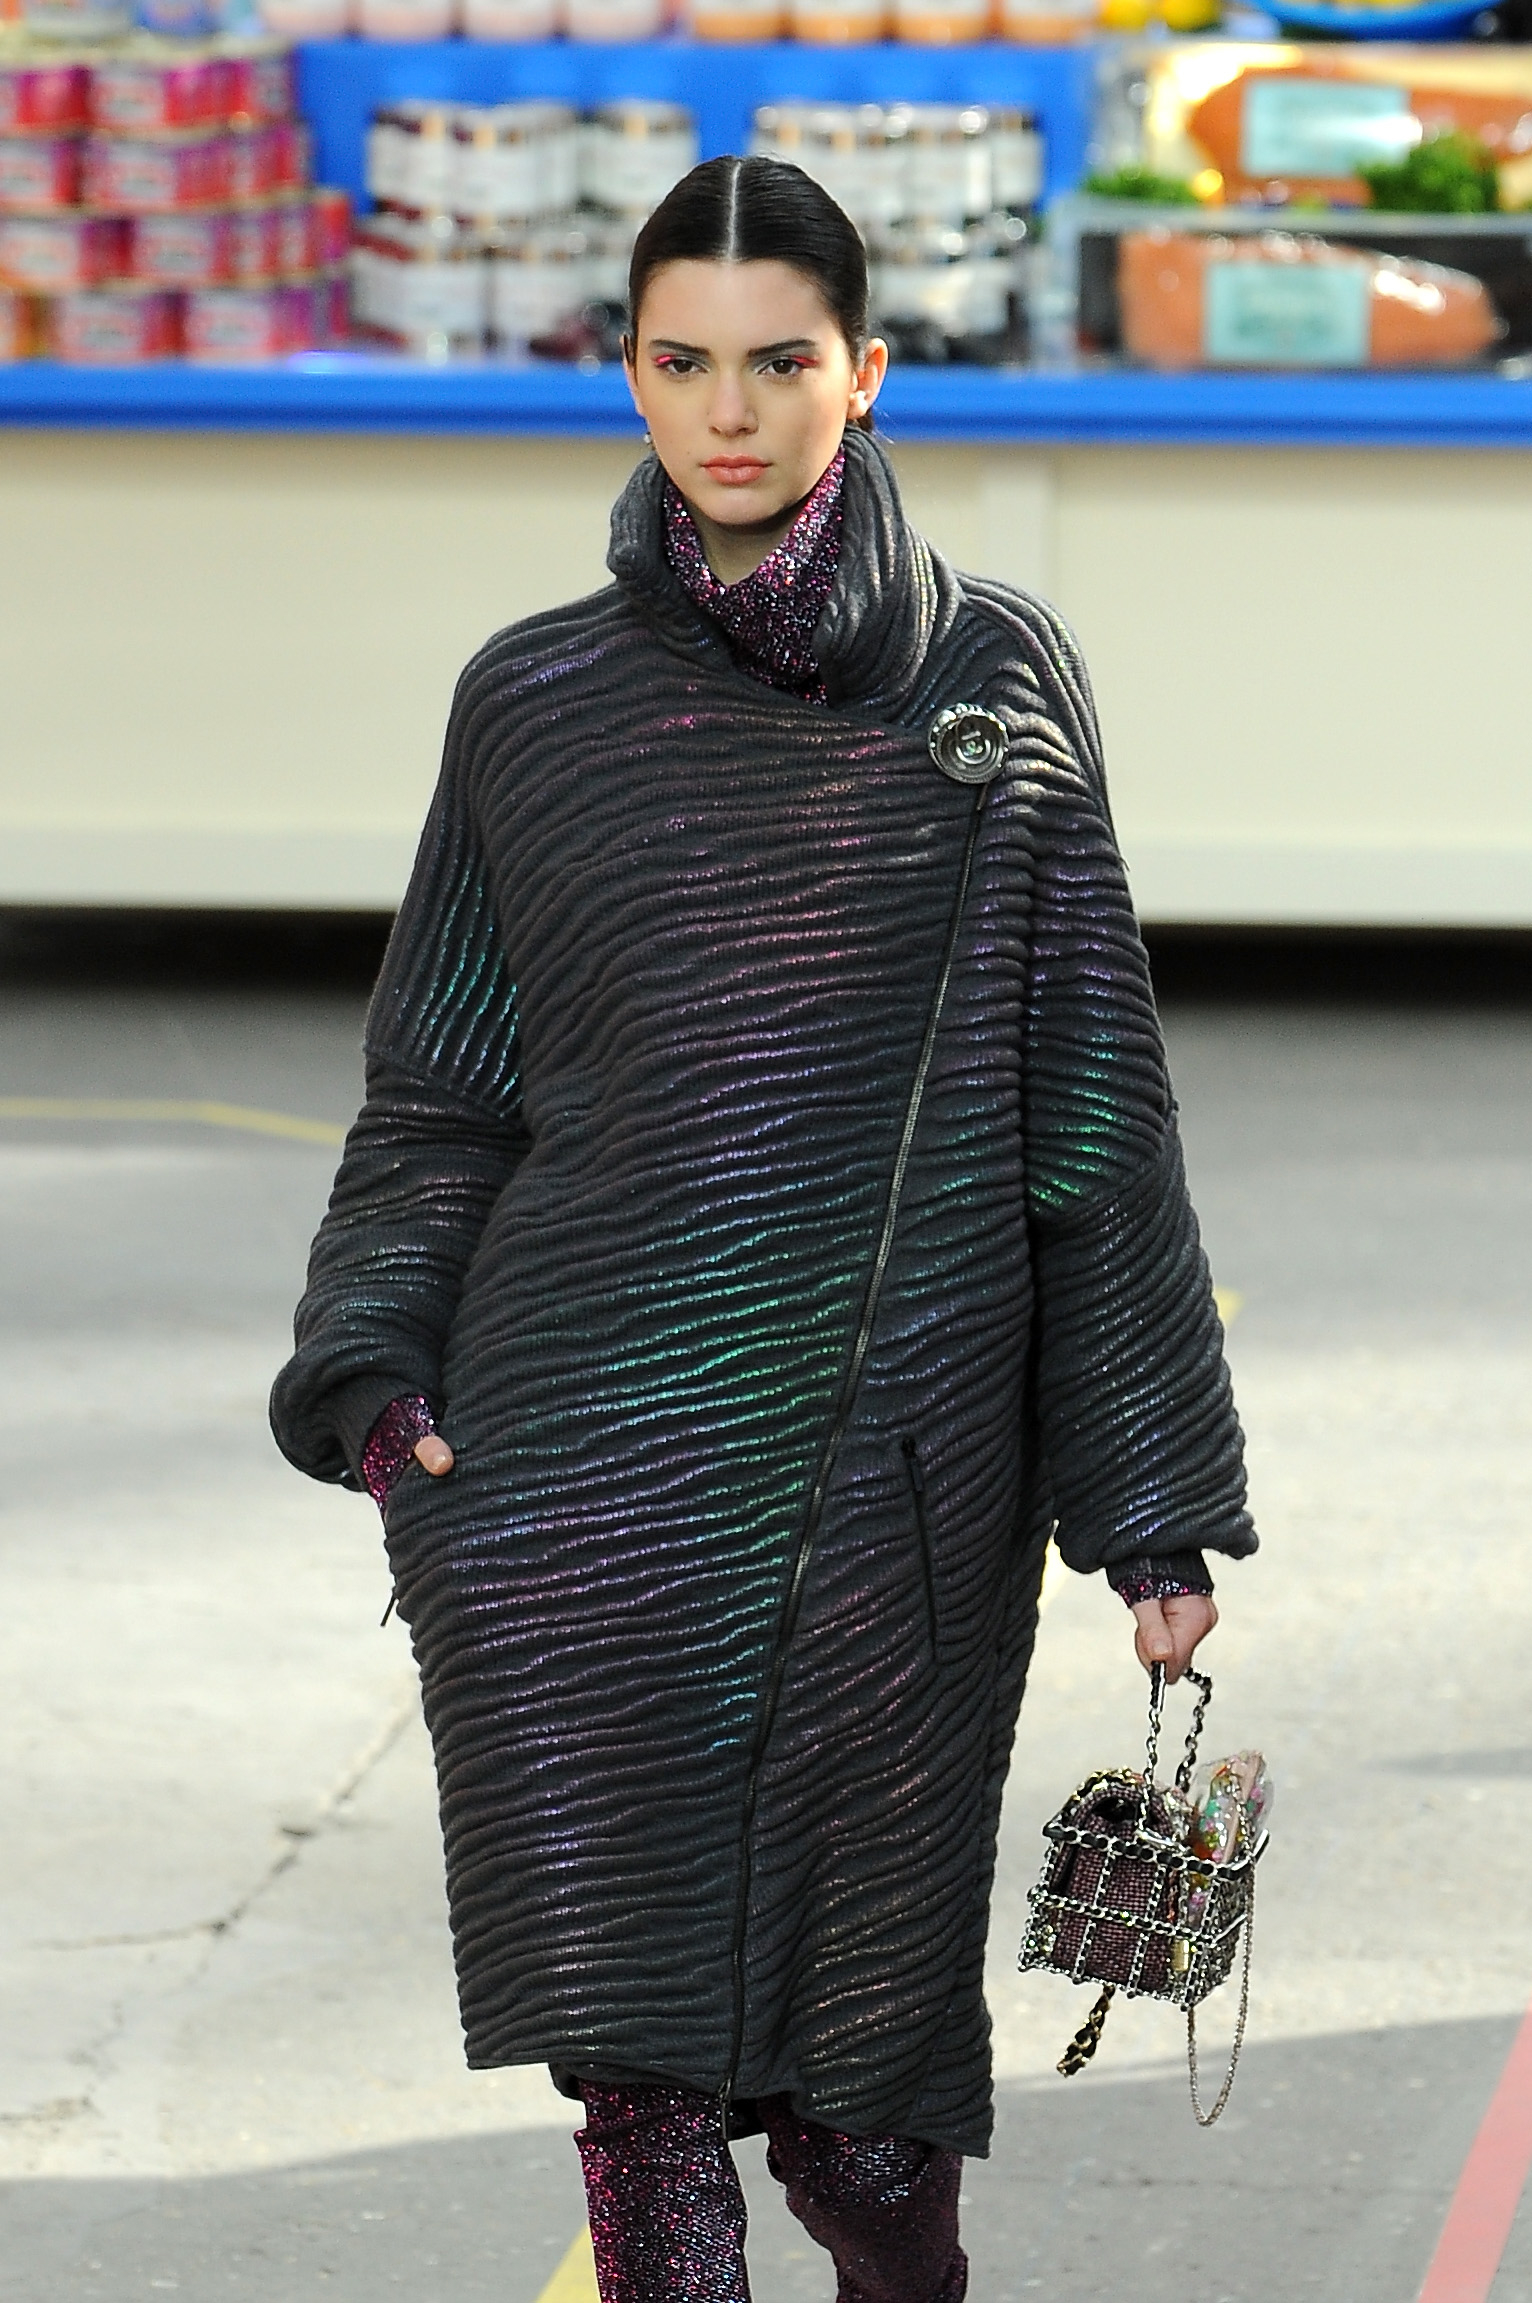 Kendall Jenner on runway in a sparkling oversized coat with metallic finish and matching leggings, accessorized with a small bag